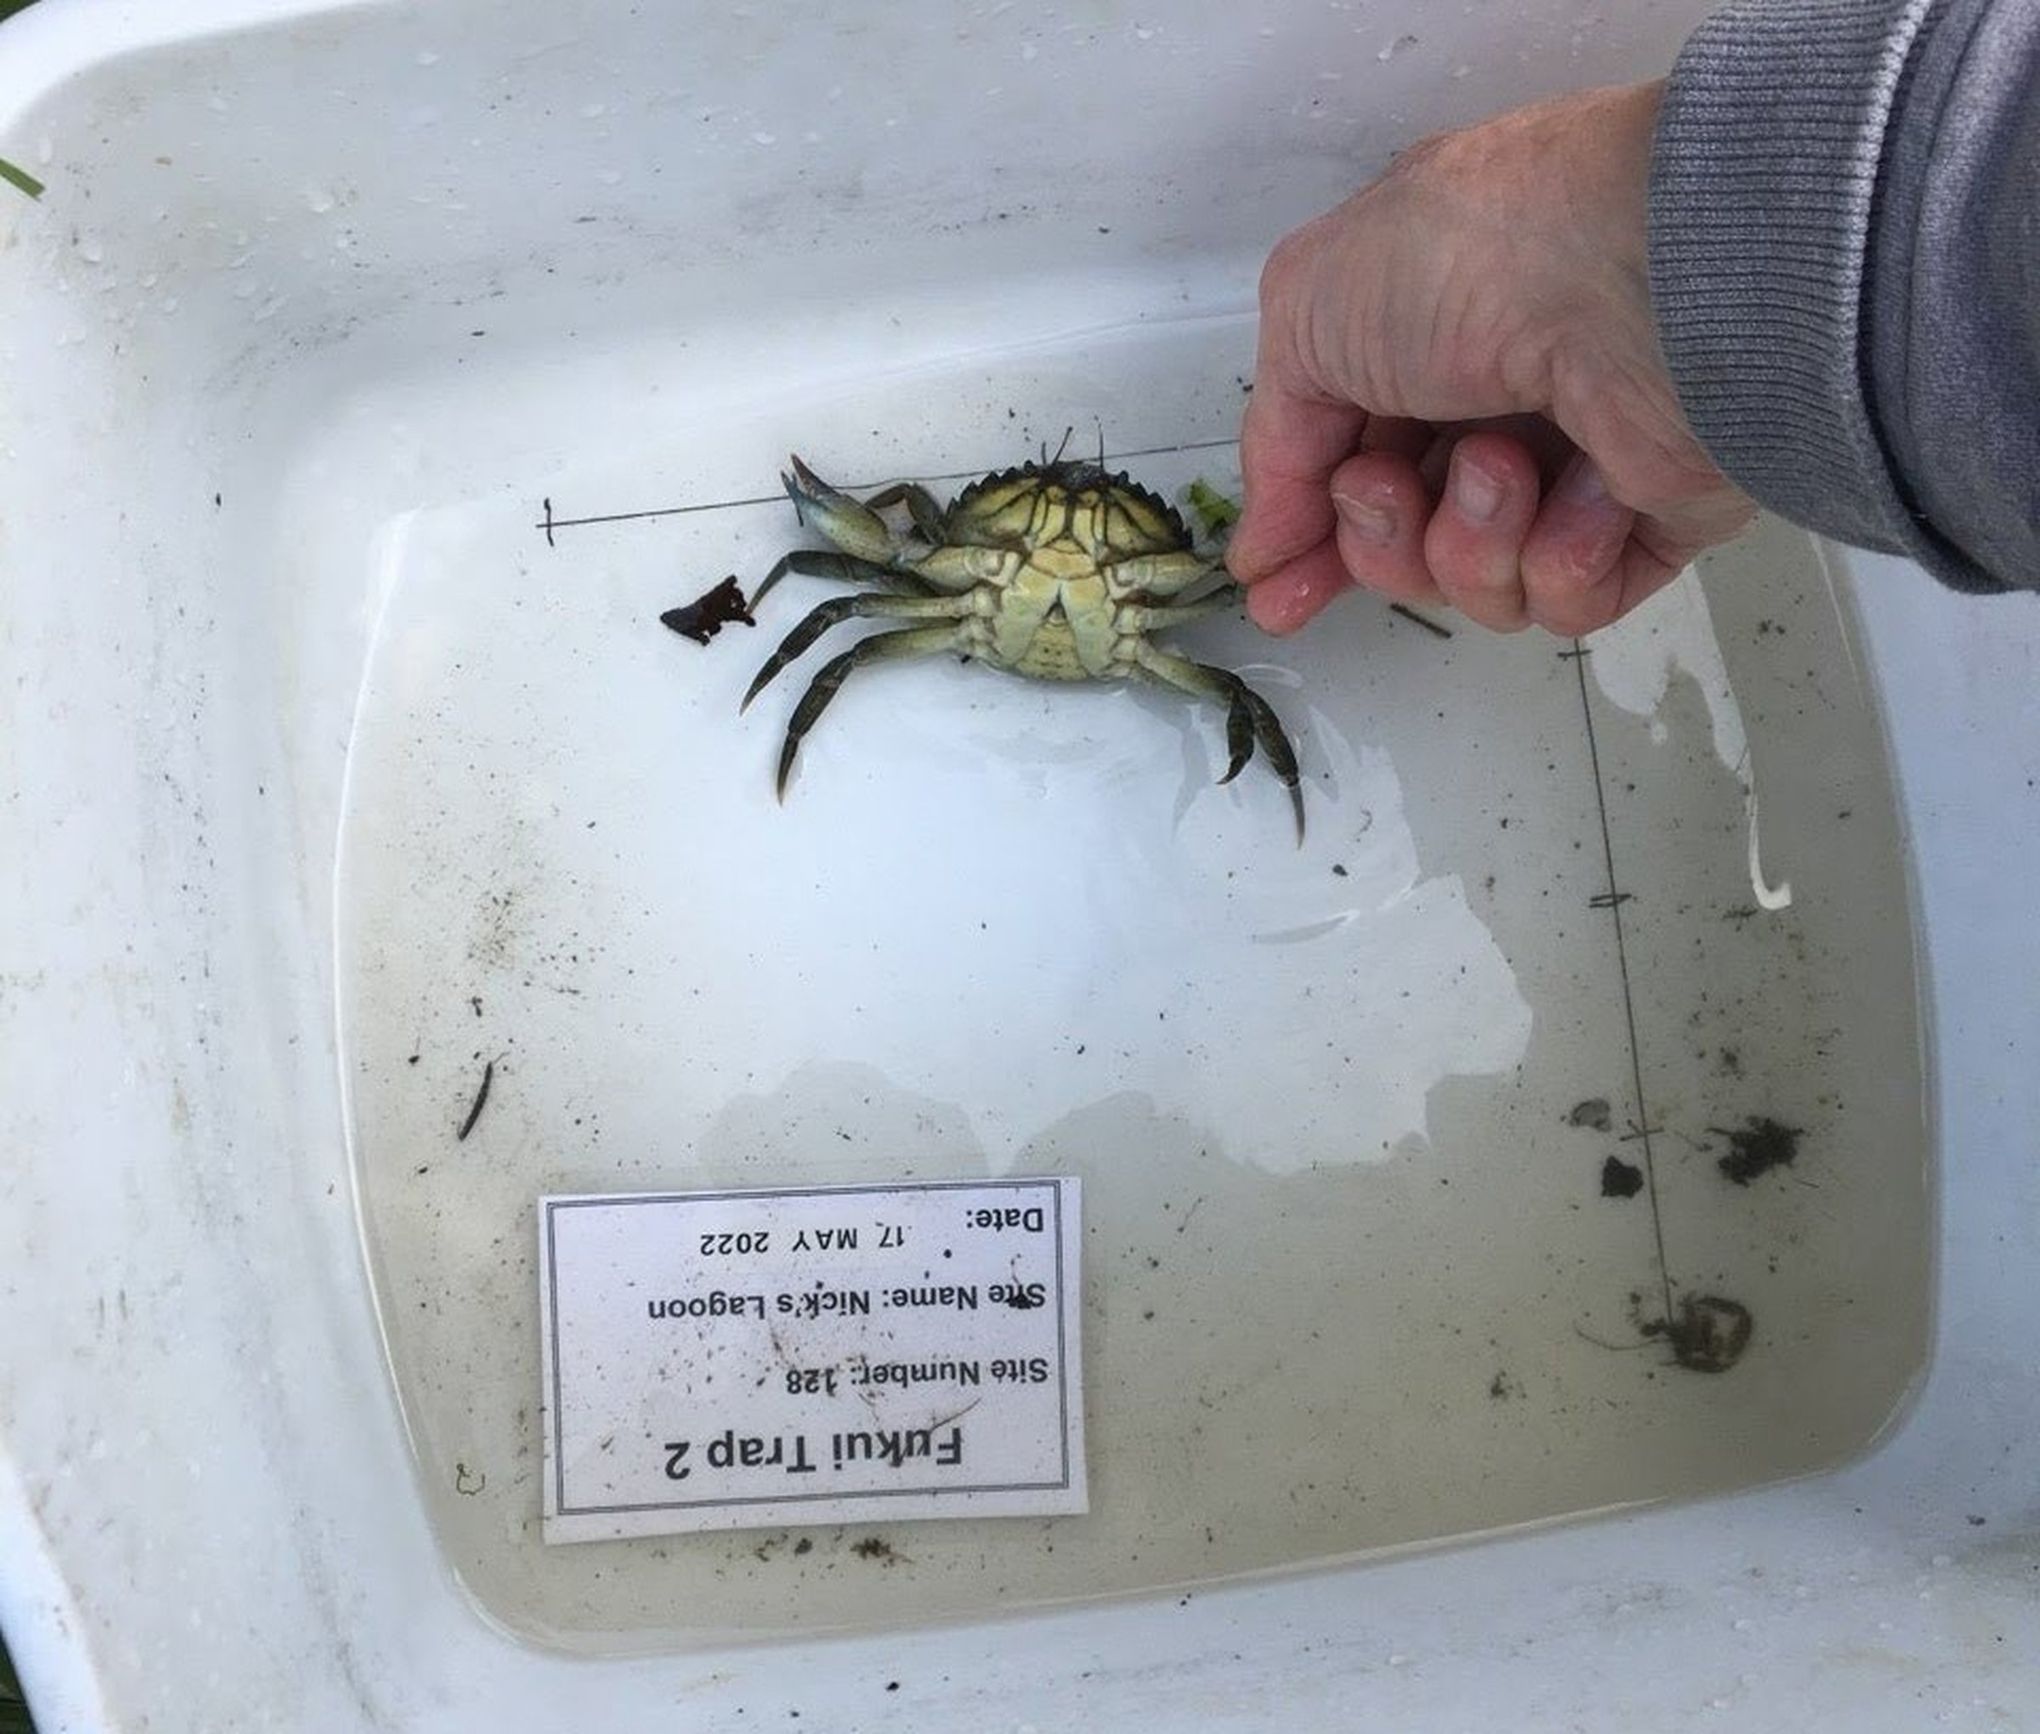 Invasive European green crab found in Hood Canal for first time